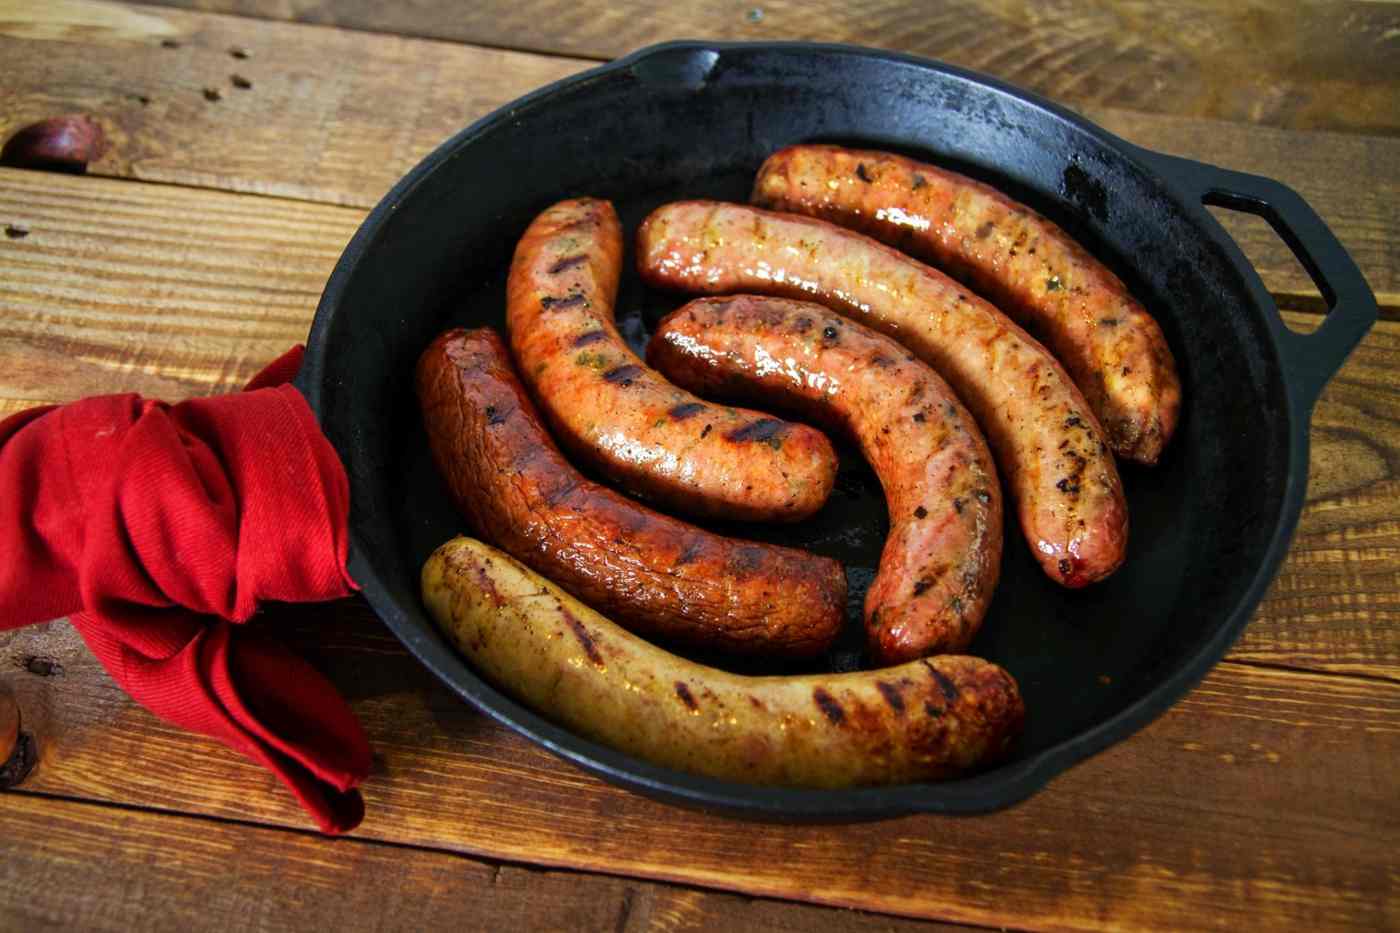 Oktoberfest recipes with roast sausages for grilling sandwiches as snacks